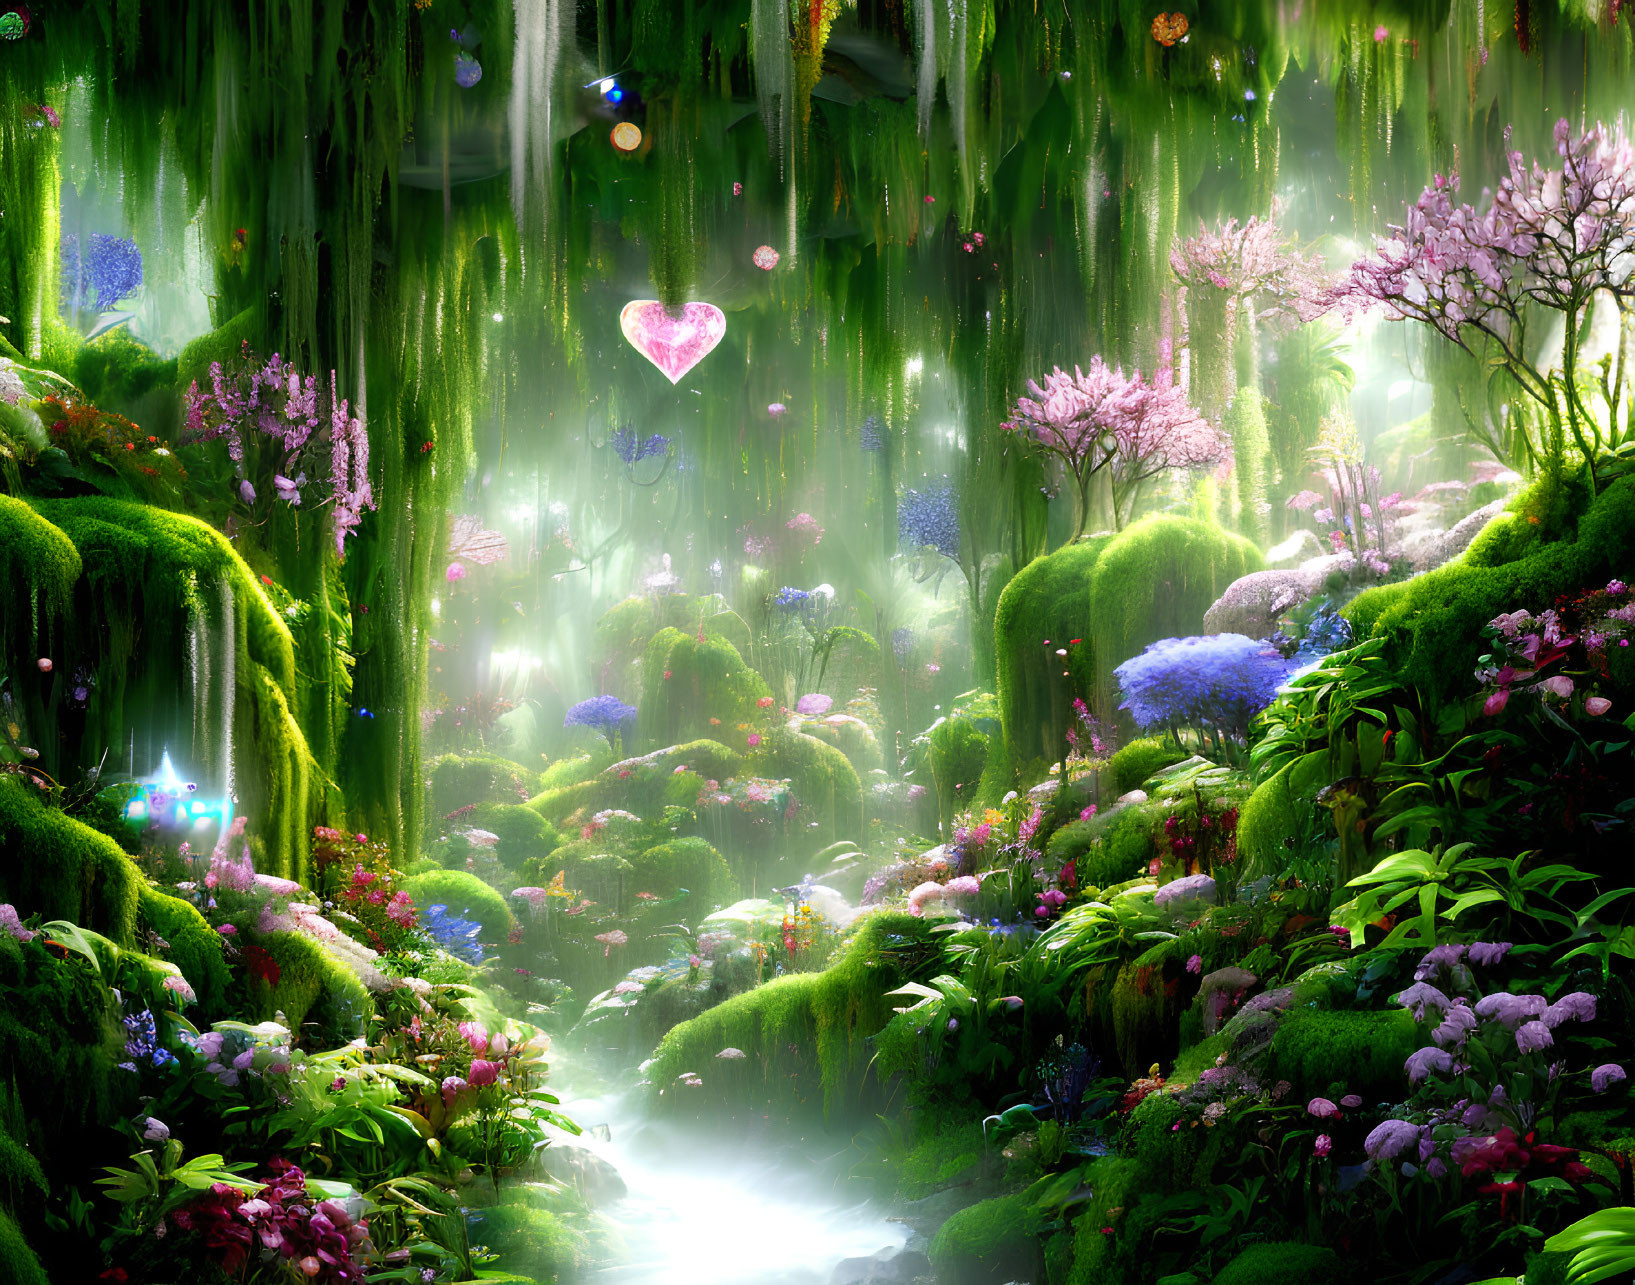 Enchanting forest scene with glowing river, floating lights, heart-shaped crystals, and blooming flowers